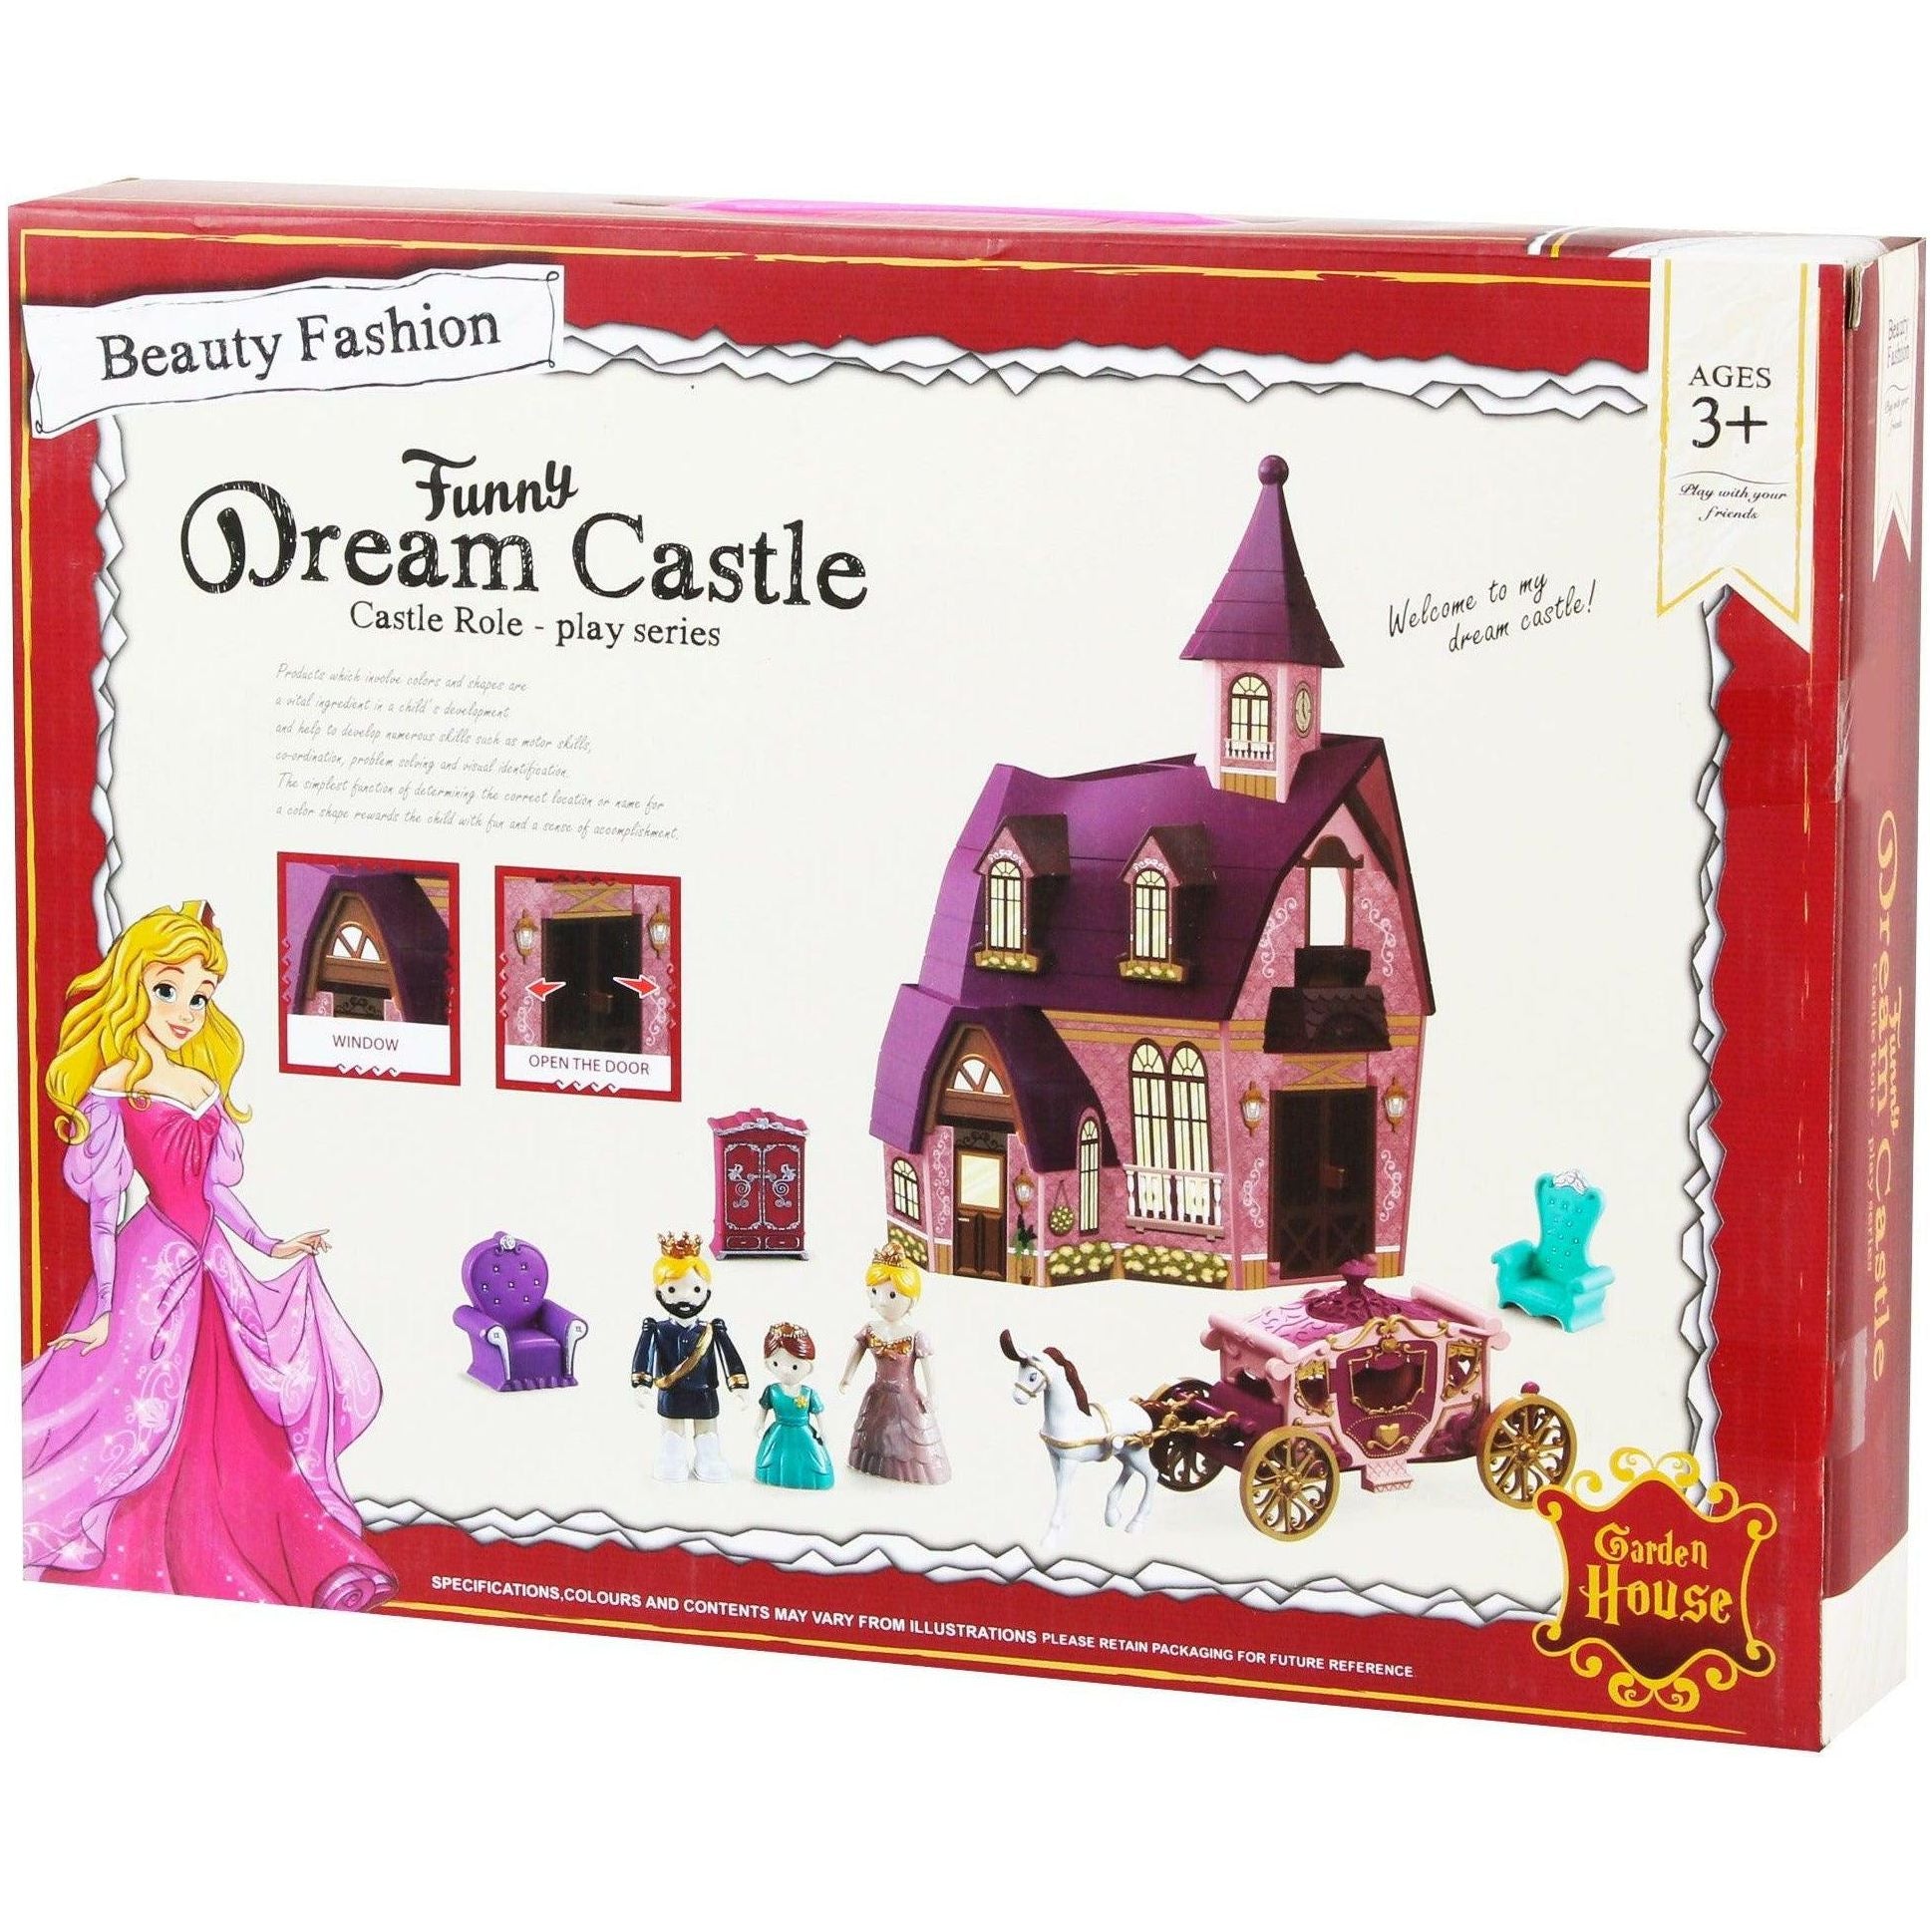 Funny Dream Castle Golden House With 3 Character and Furnitrues - BumbleToys - 4+ Years, Doll House, Dolls, Girls, Kids Furniture, Toy House